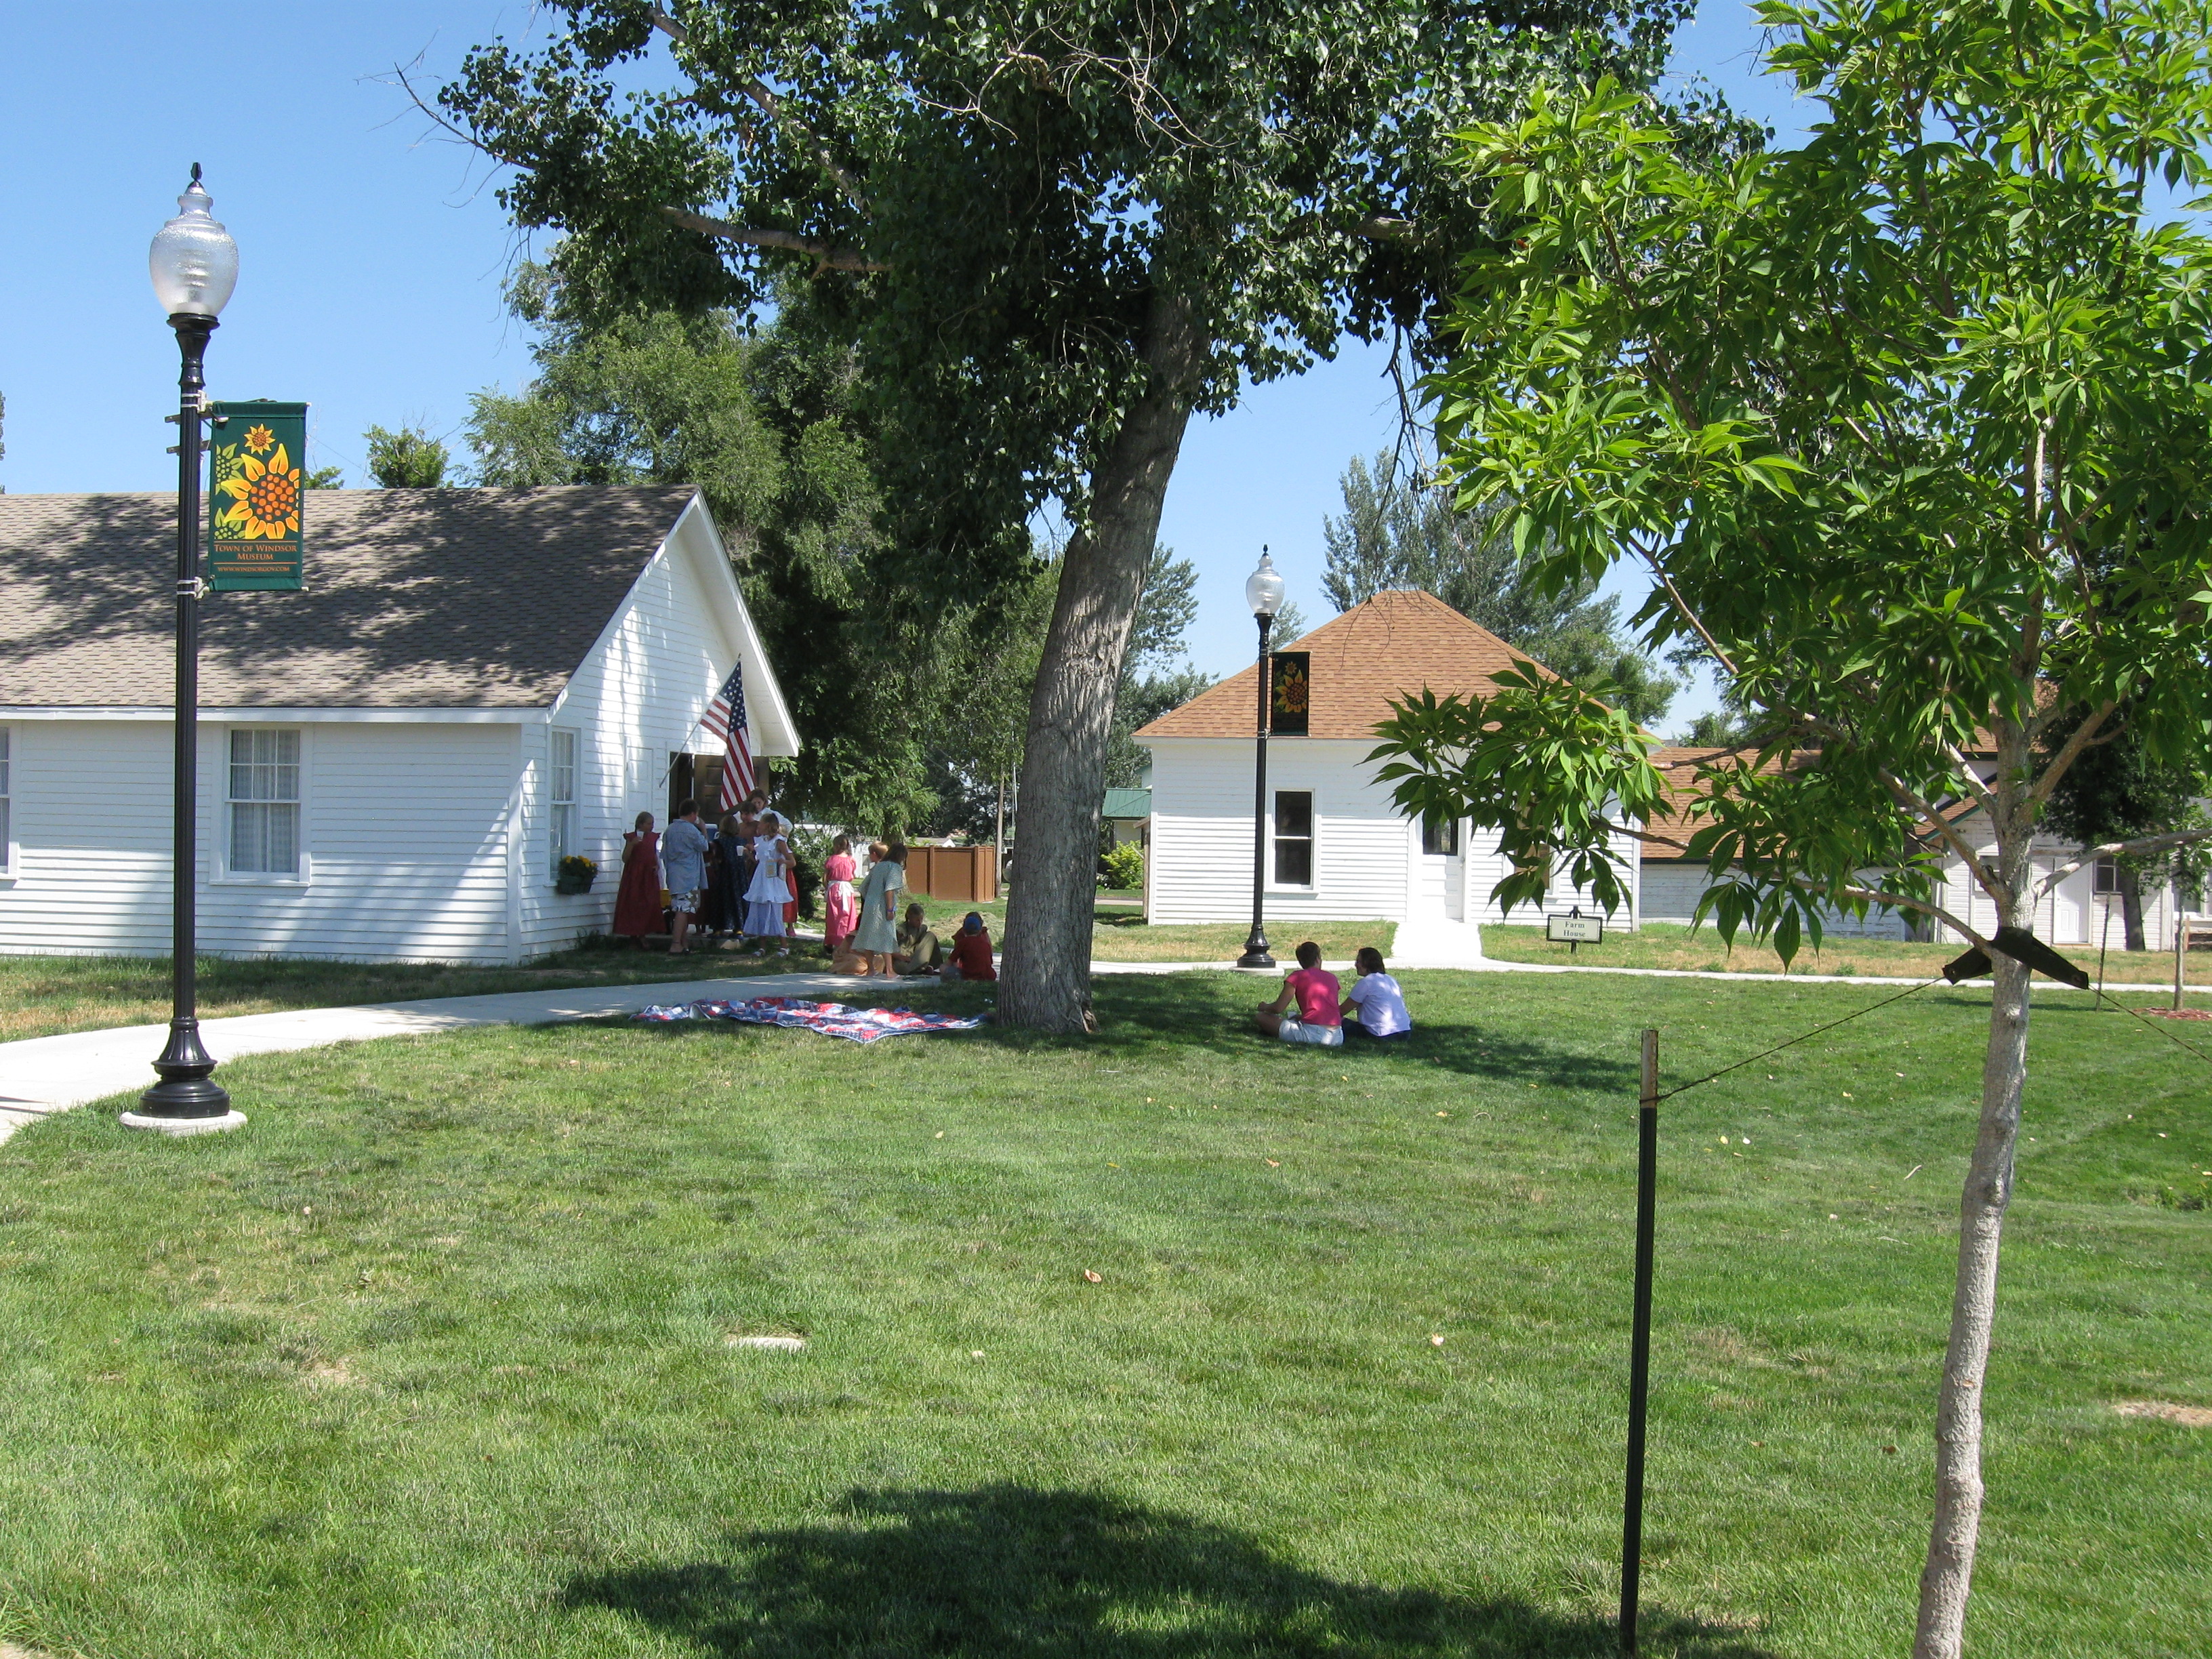 The historic Whitehall Schoolhouse in Windsor, Colorado